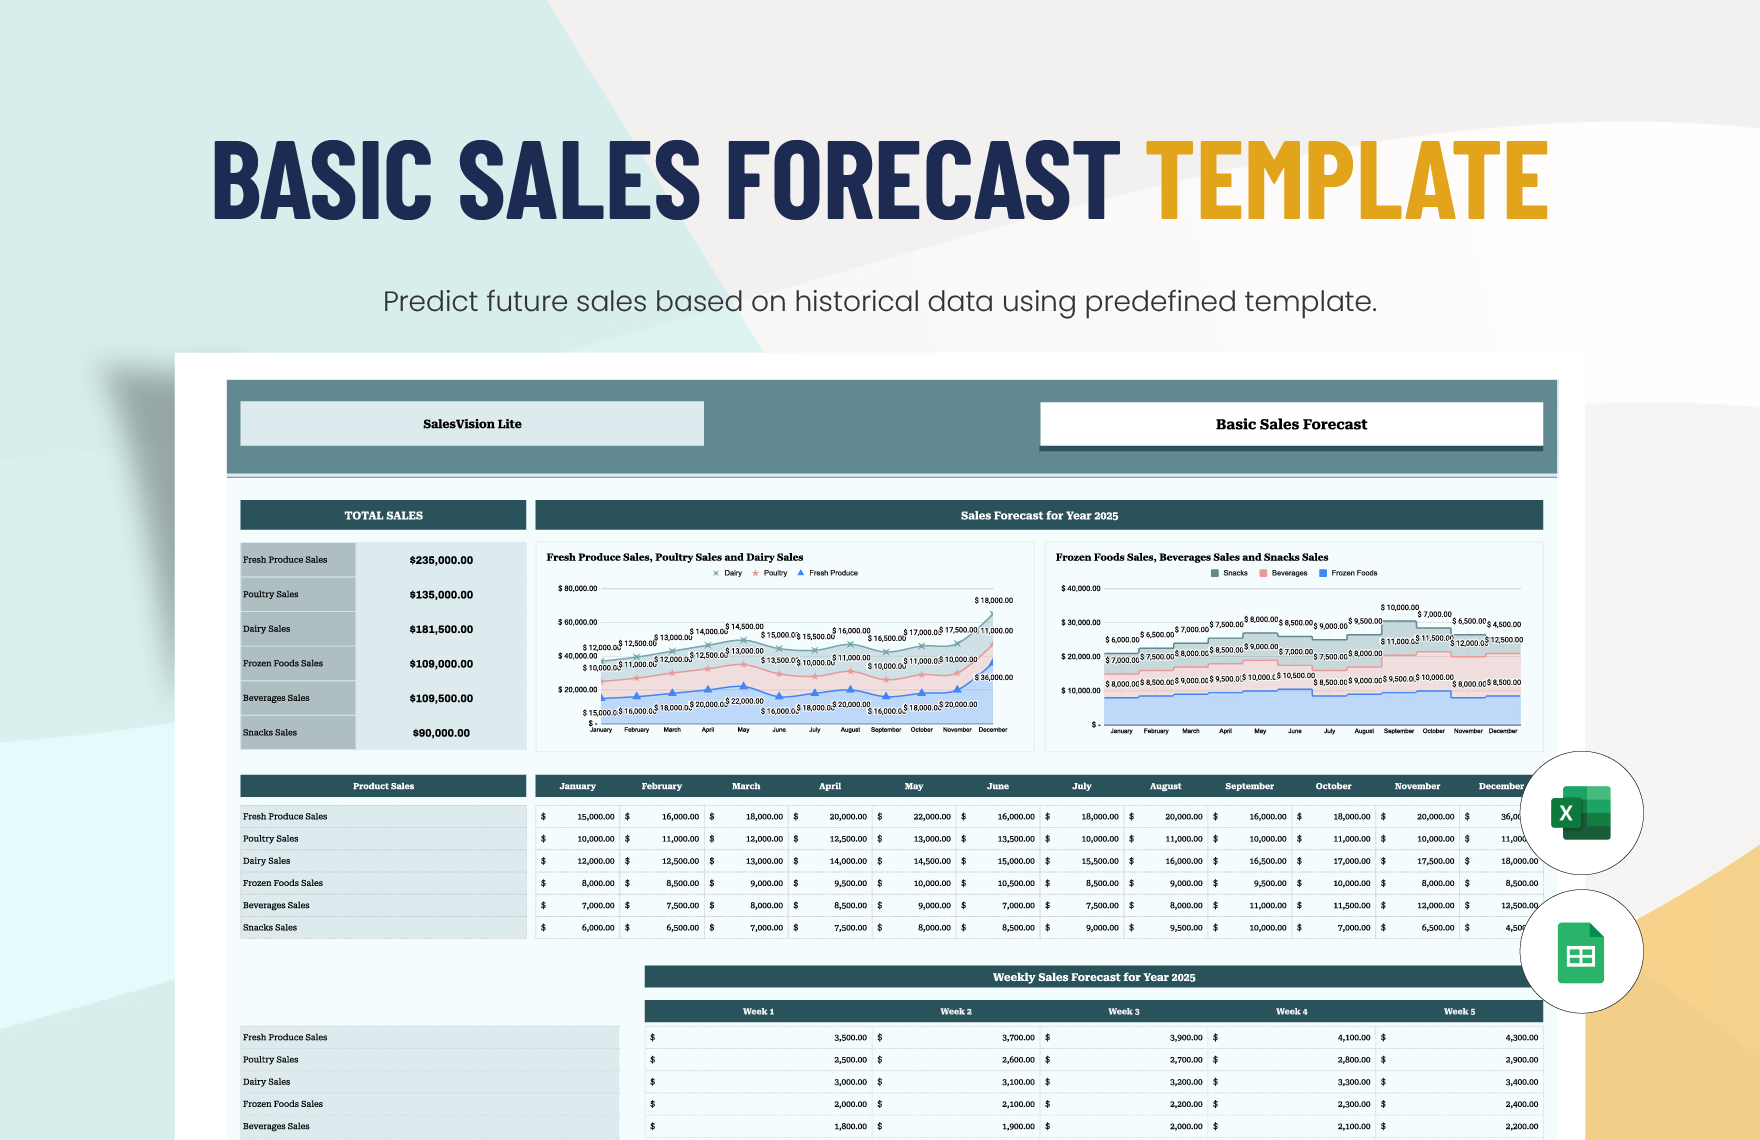 Basic Sales Forecast Template in Excel, Google Sheets